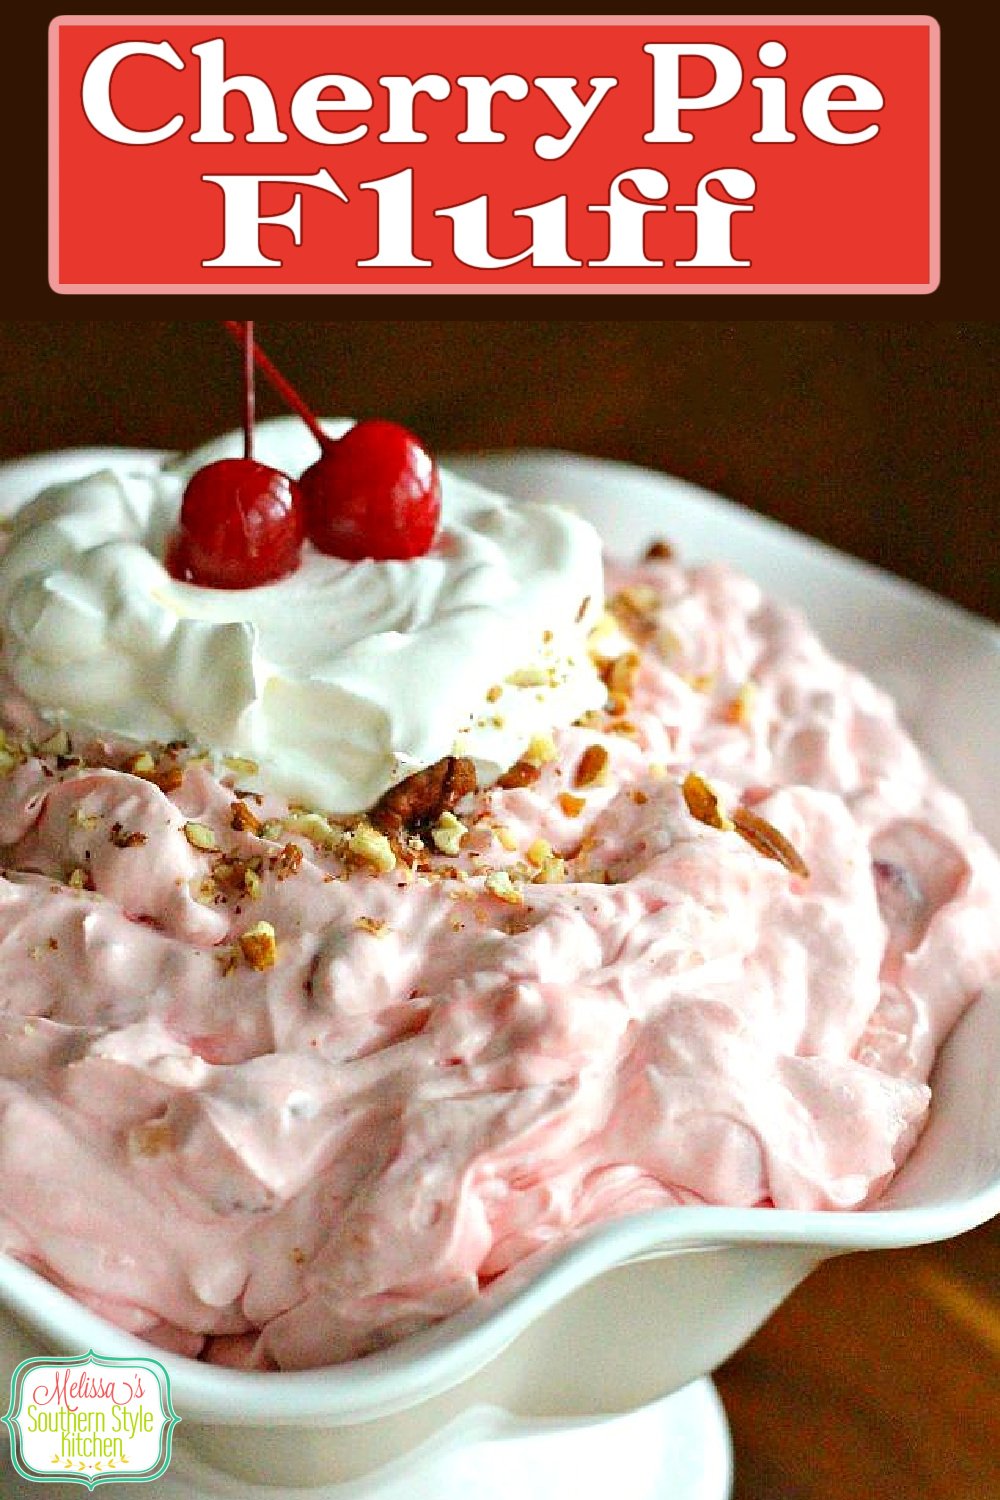 This no-bake Cherry Pie Fluff is so easy you'll make it over and over again #cherrypie #cherrypiefluff #nobakefluffrecipes #fluff #fluffrecipes #cherries #easydesserts #cherry #desserts #dessertfoodrecipes #southernfood #southernrecipes via @melissasssk